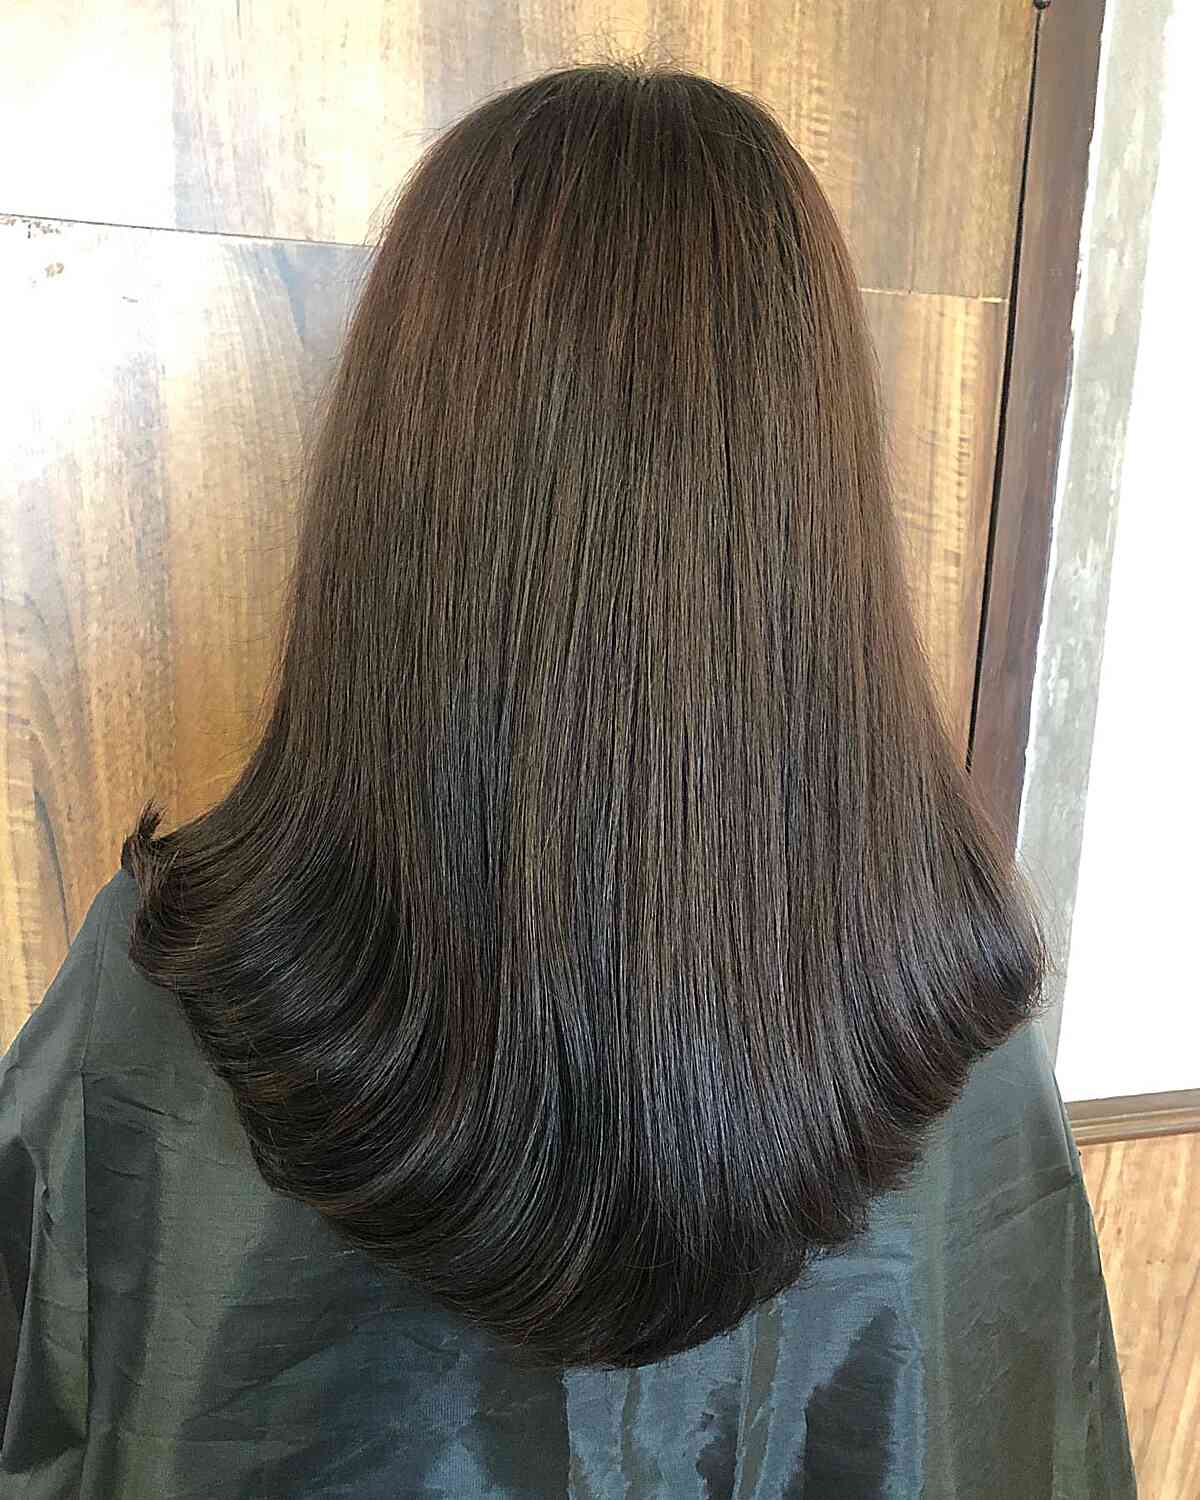 Long and Sleek V-Cut Brunette Hair with Black Ends and Swoopy Ends